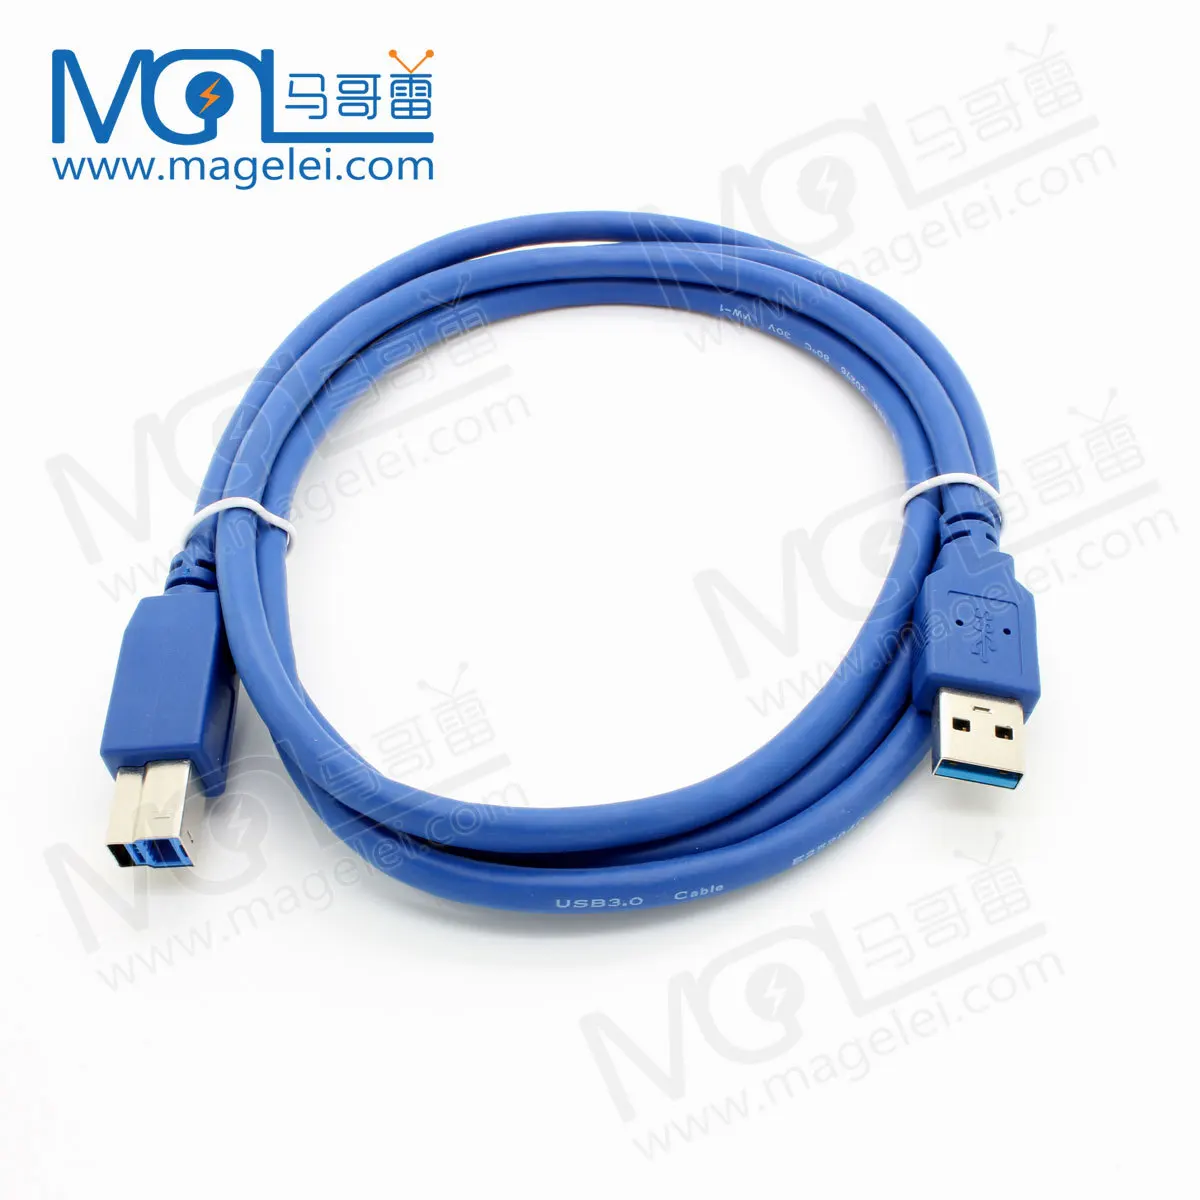 Generic Supper Speed USB 3.0 Printer Cable USB 3.0 AM to BM Cable Extension Wire Cord Line for HP Printer Device Accessories